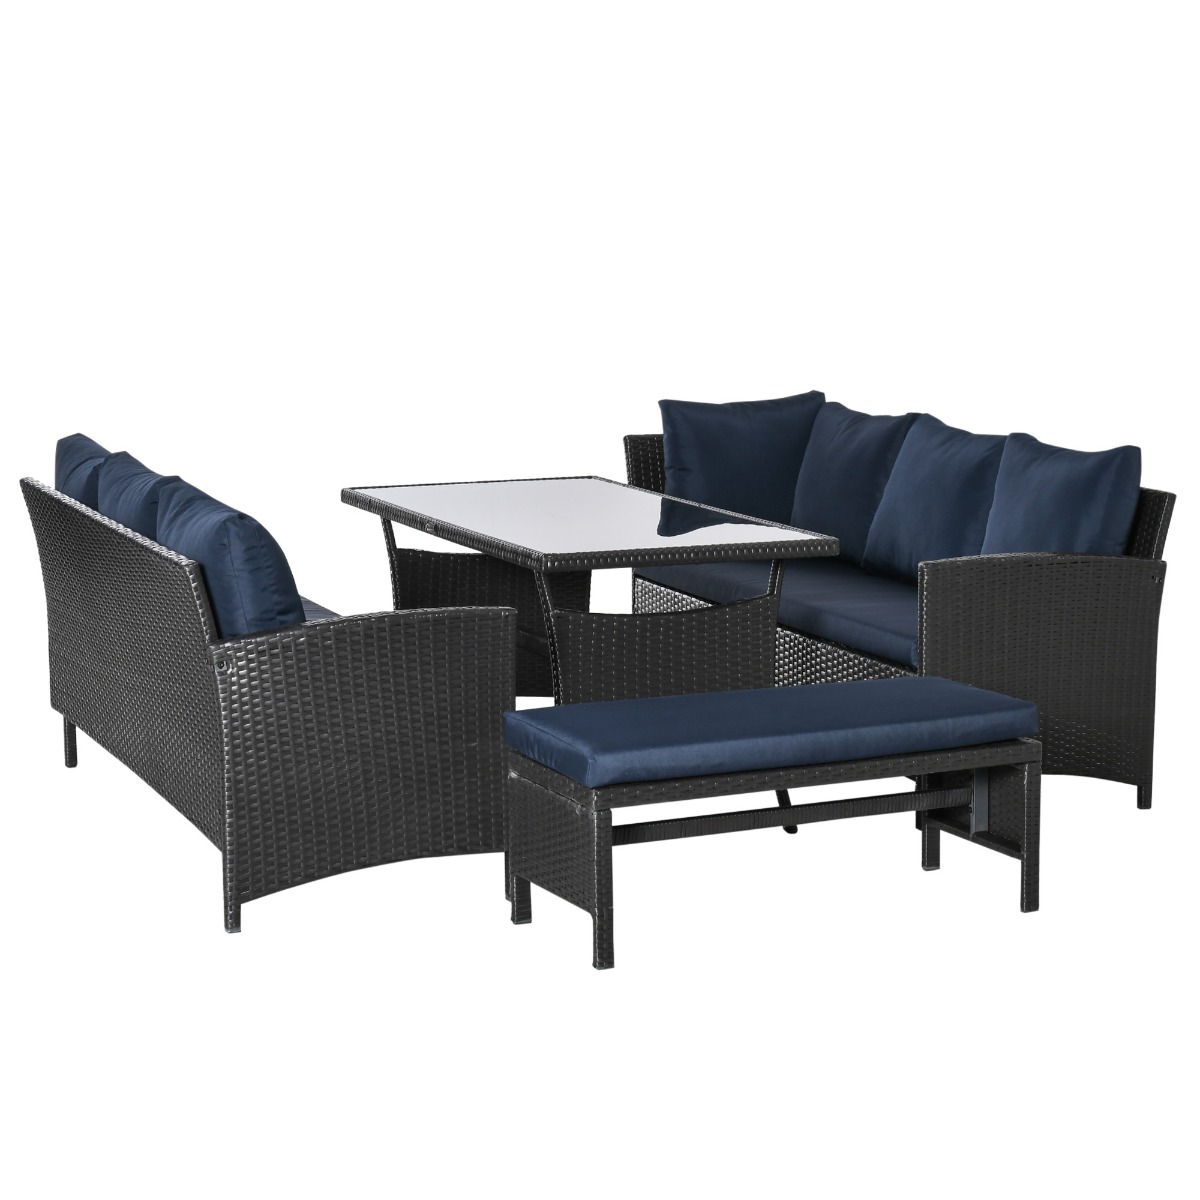 Outsunny 4 Piece Outdoor Patio Rattan Wicker Dining Table Sofa Set